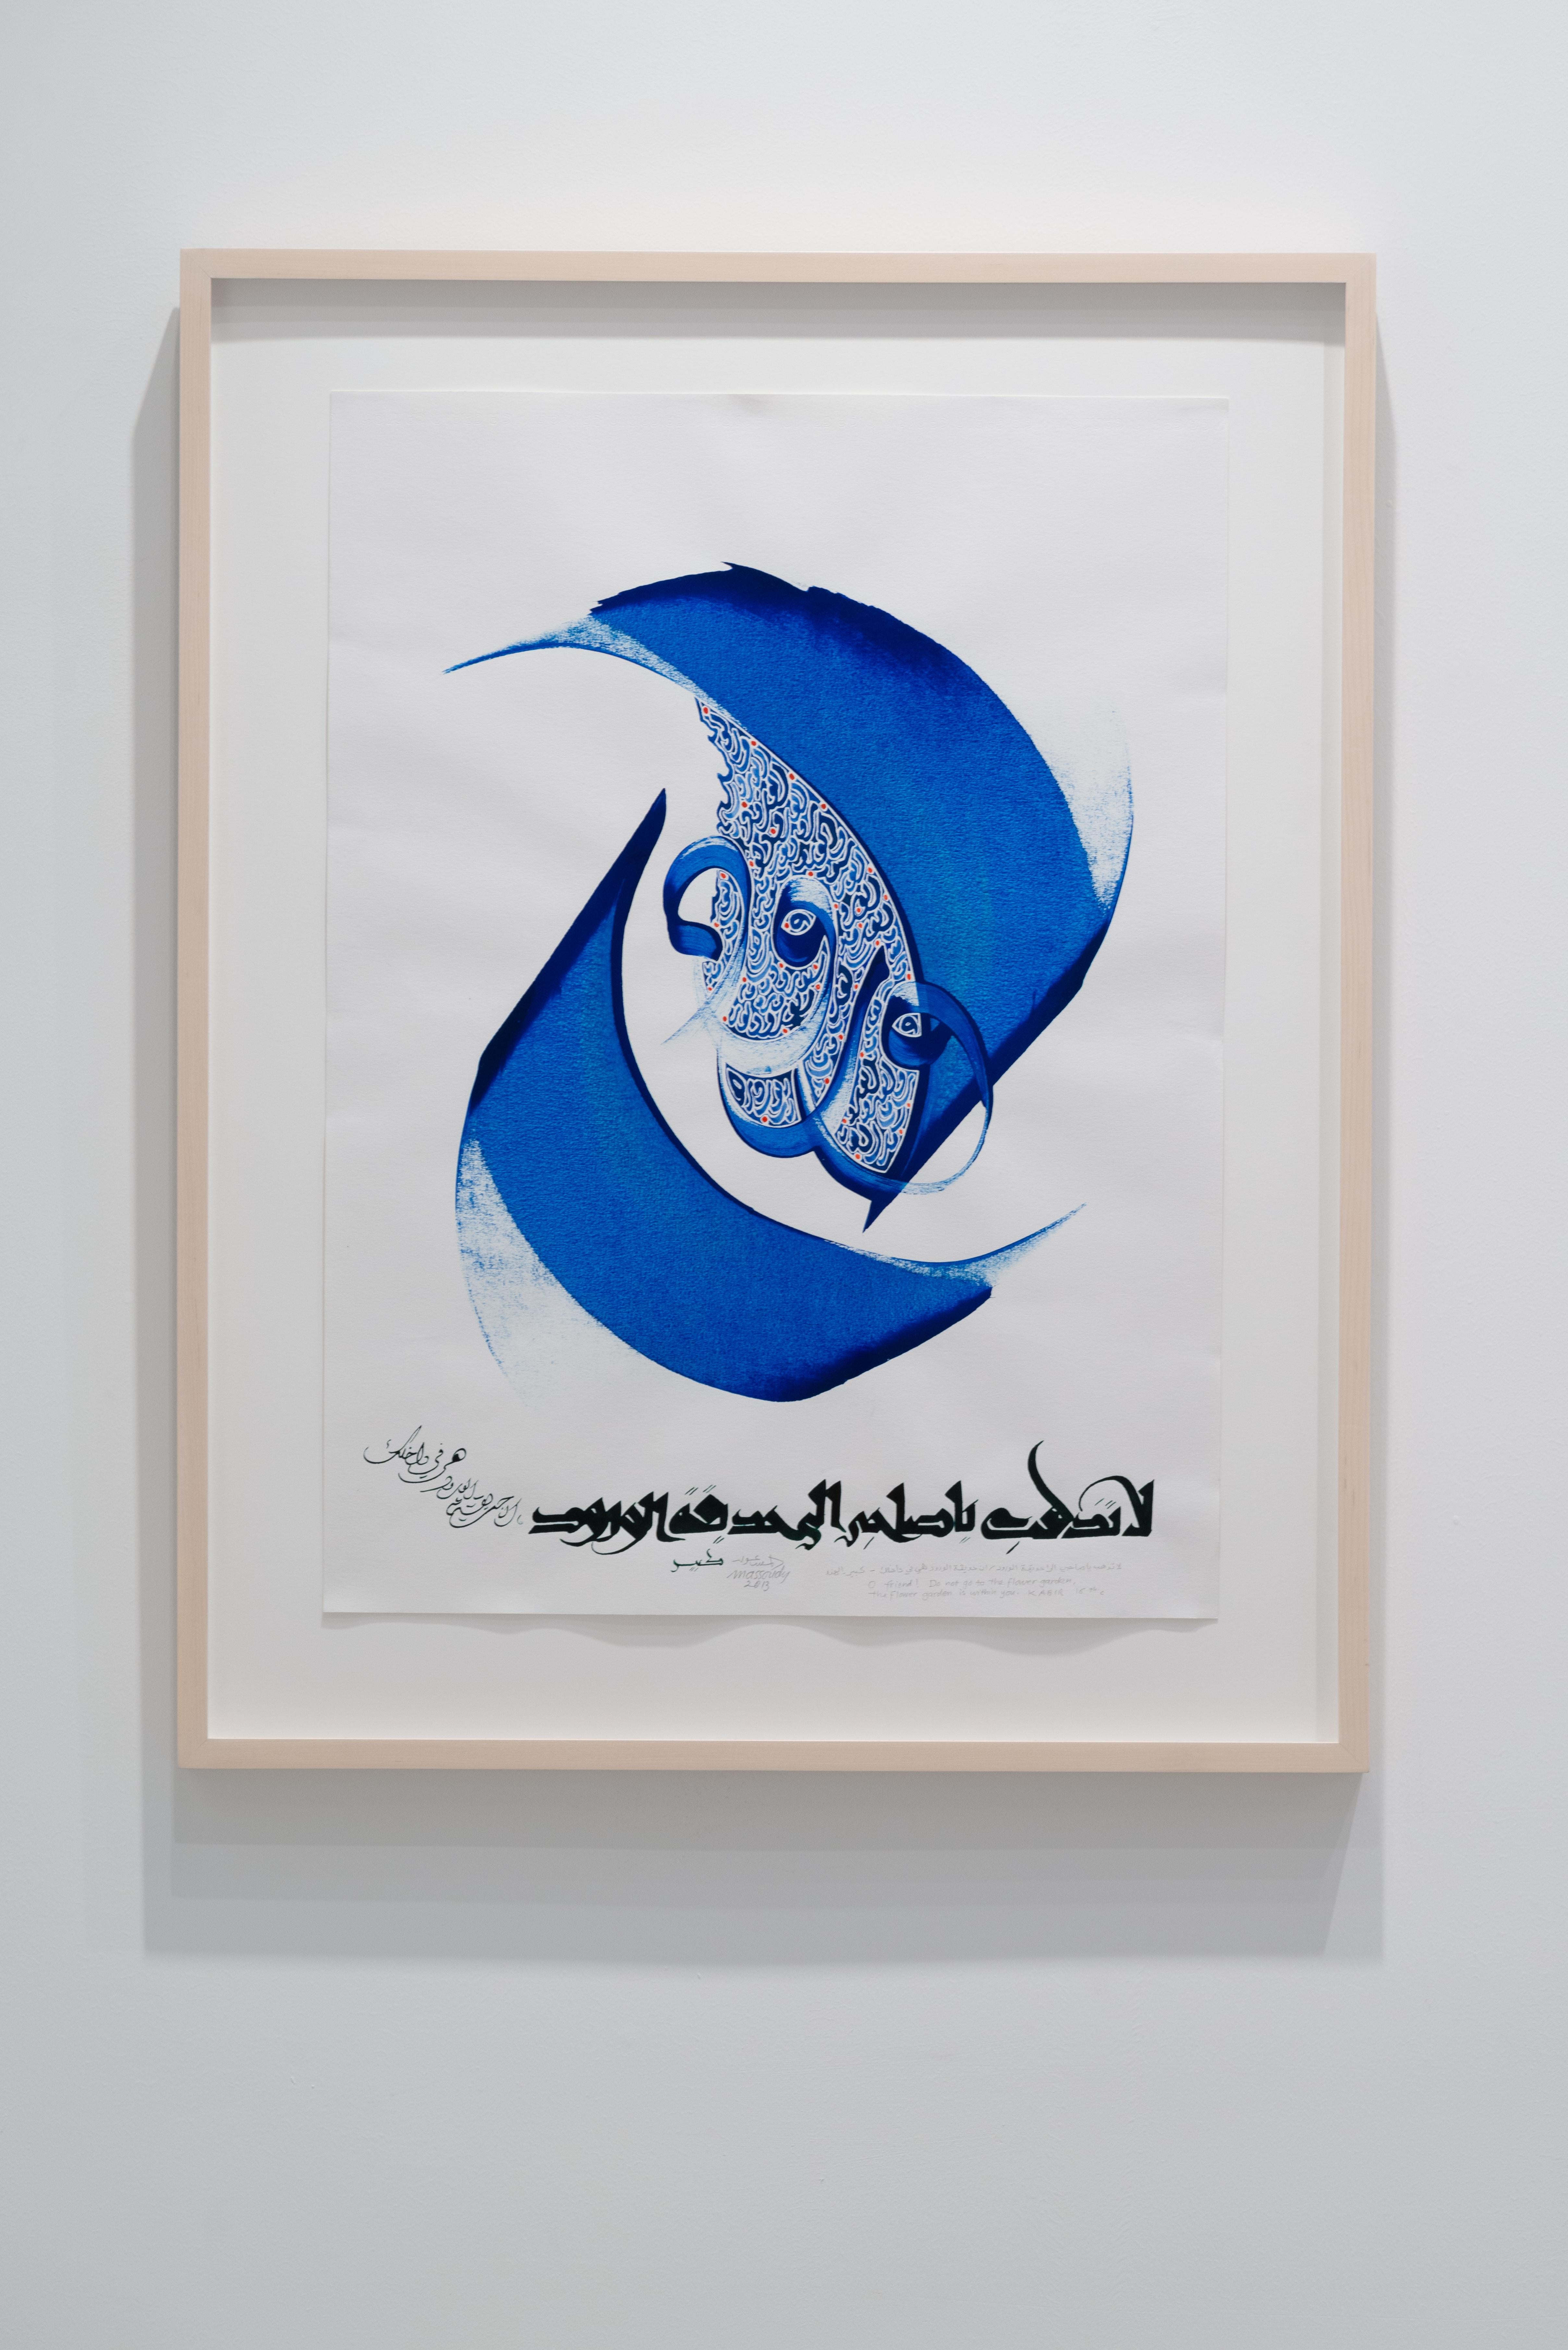 Vibrant blue contemporary Islamic calligraphy on paper